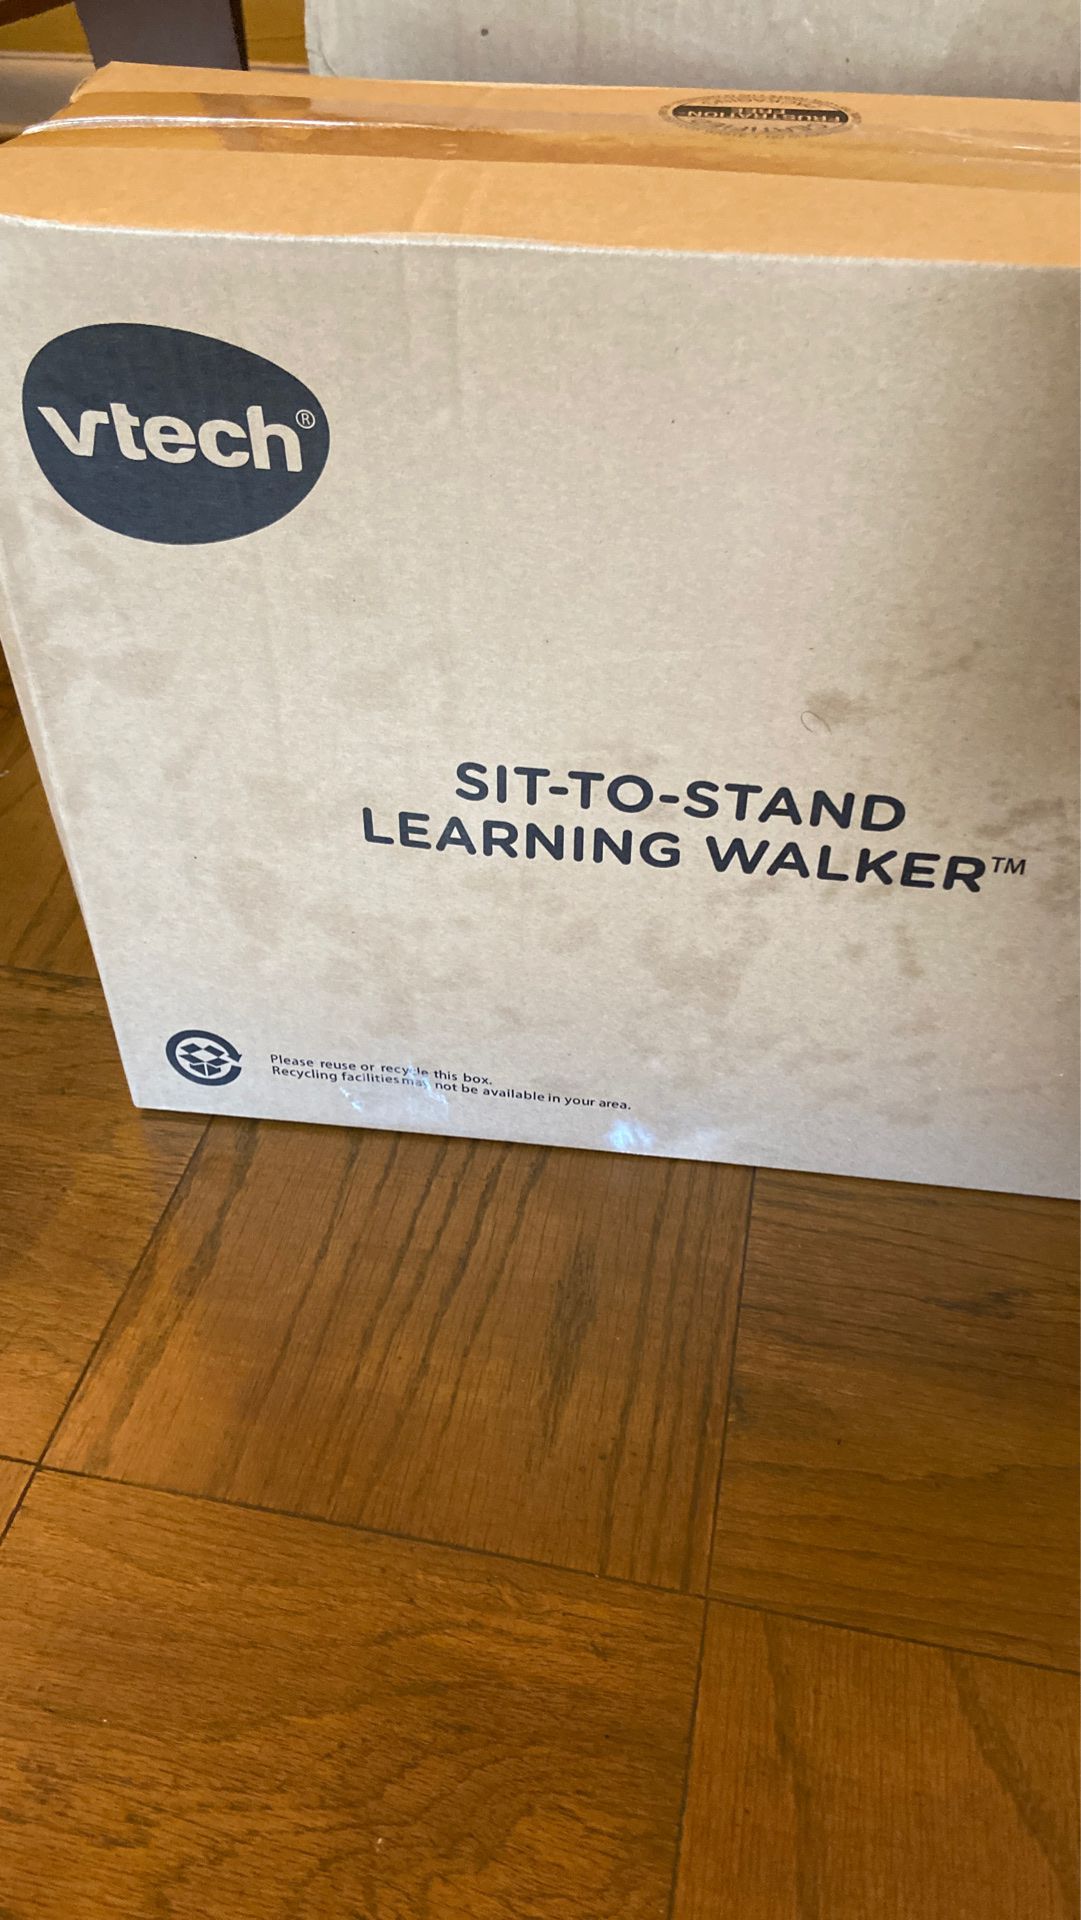 Brand new Vtech Sit to Stand learning walker